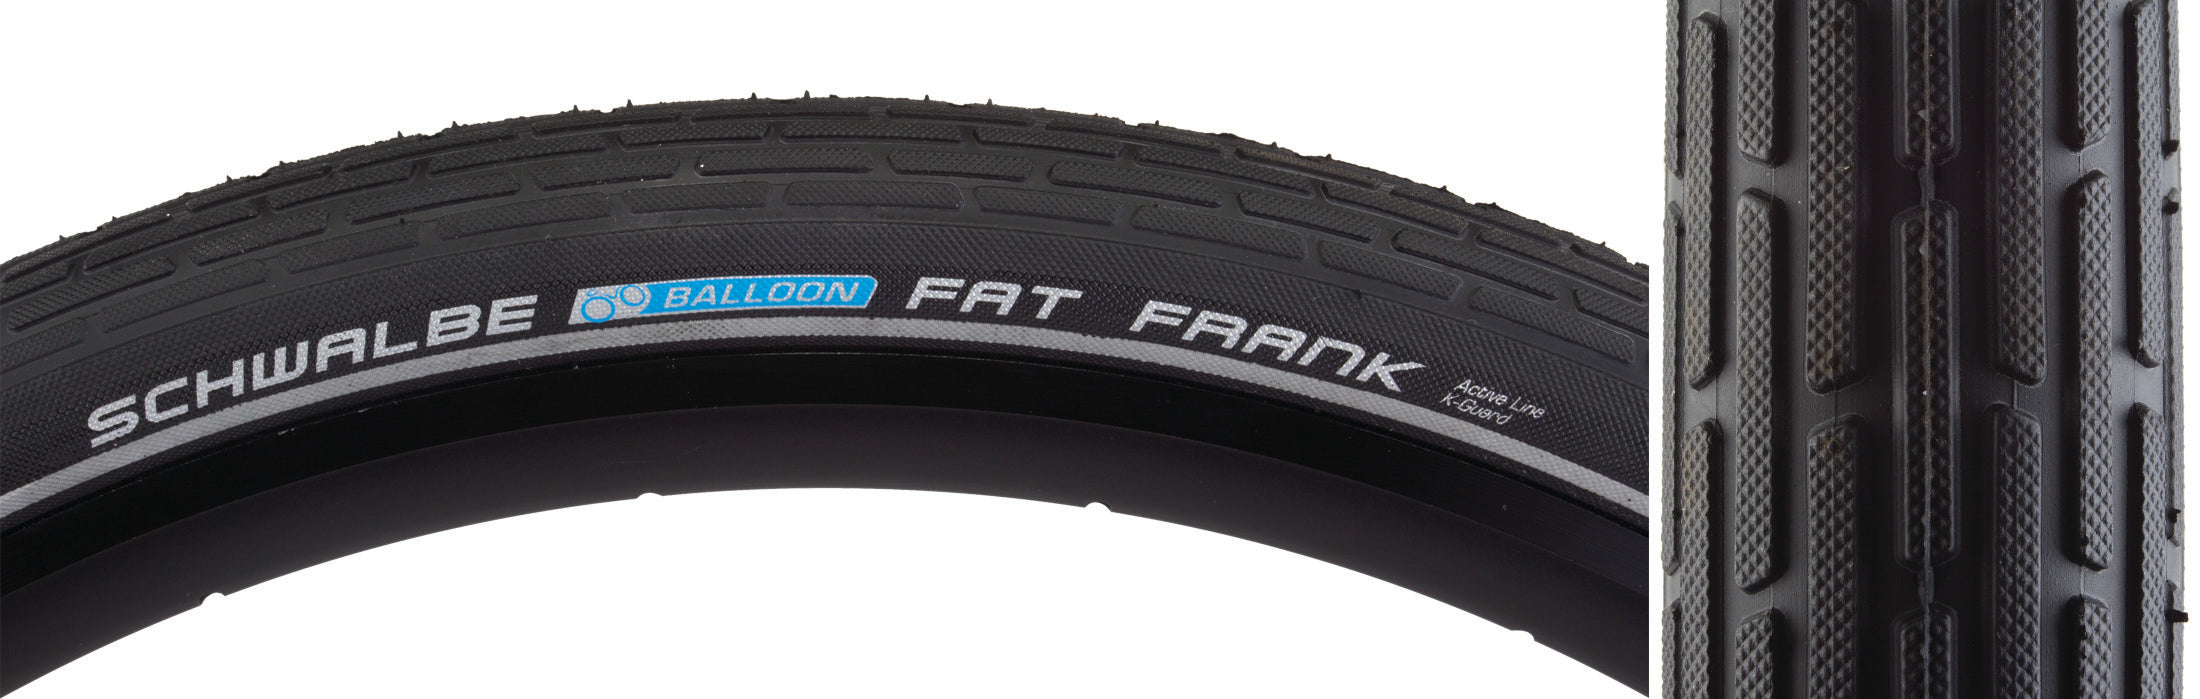 Side view of the 26" x 2.35" Schwalbe Fat Frank tire in black